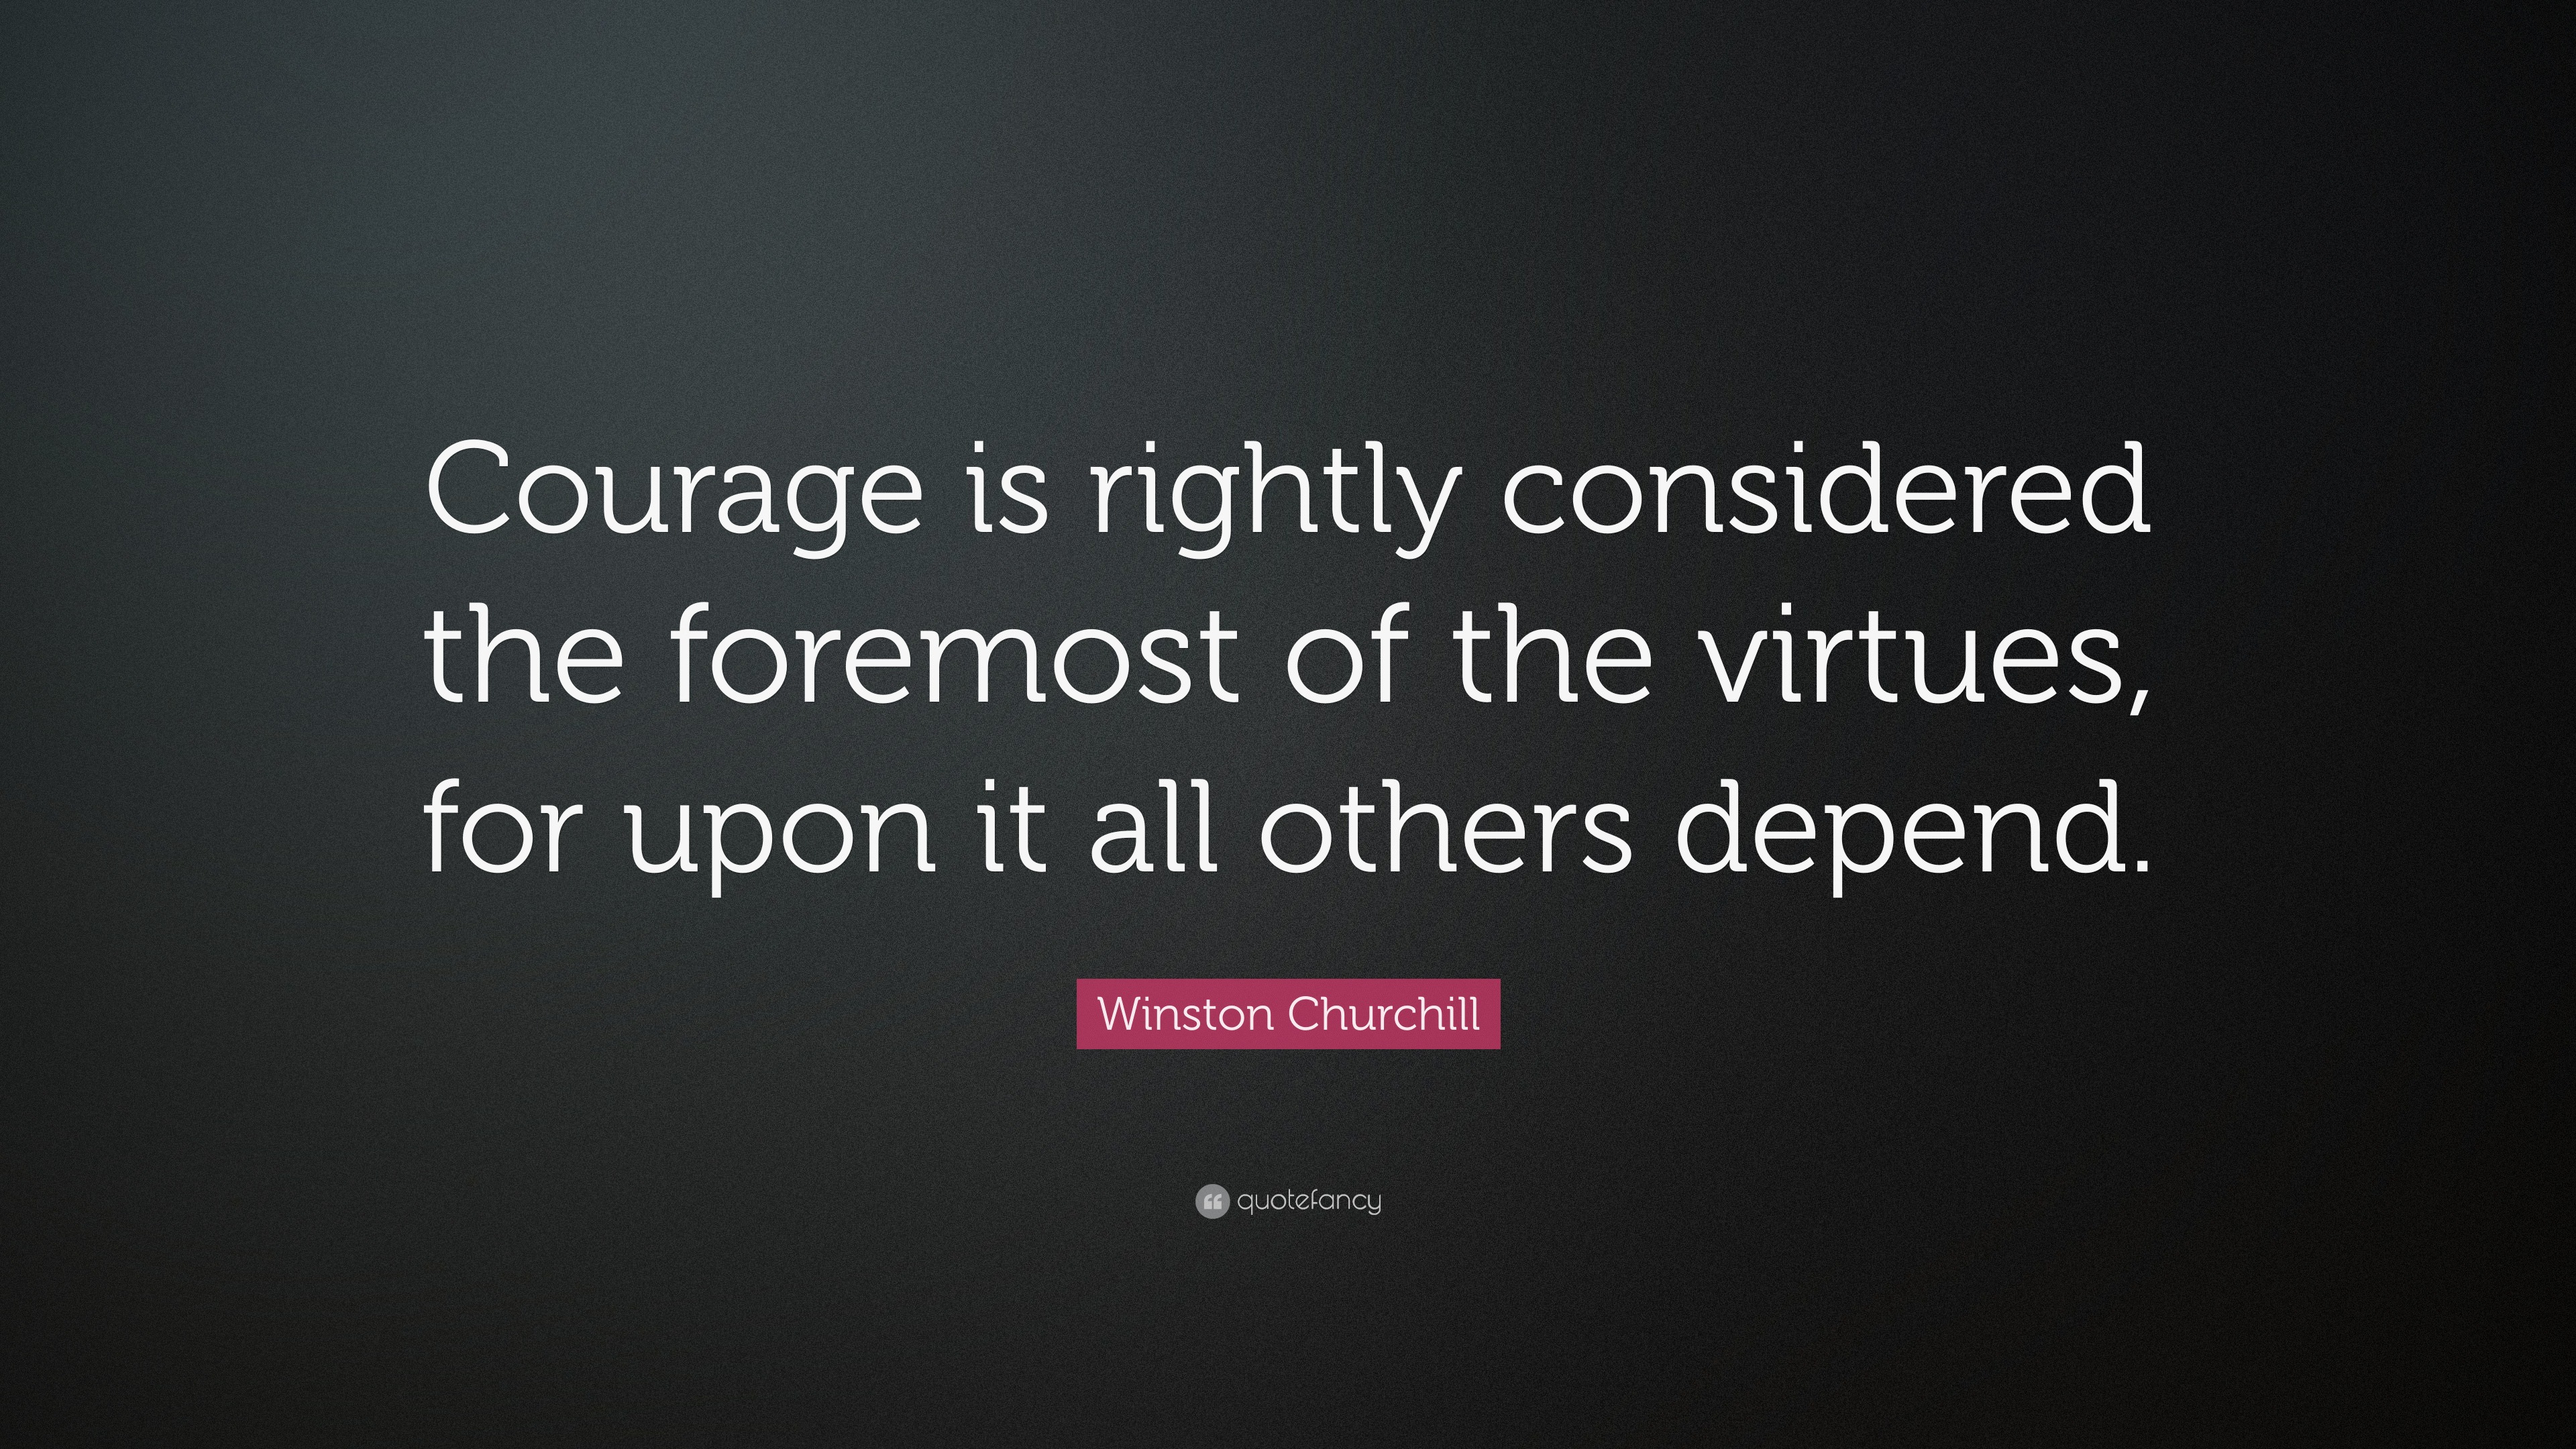 Winston Churchill Quote: “Courage is rightly considered the foremost of ...